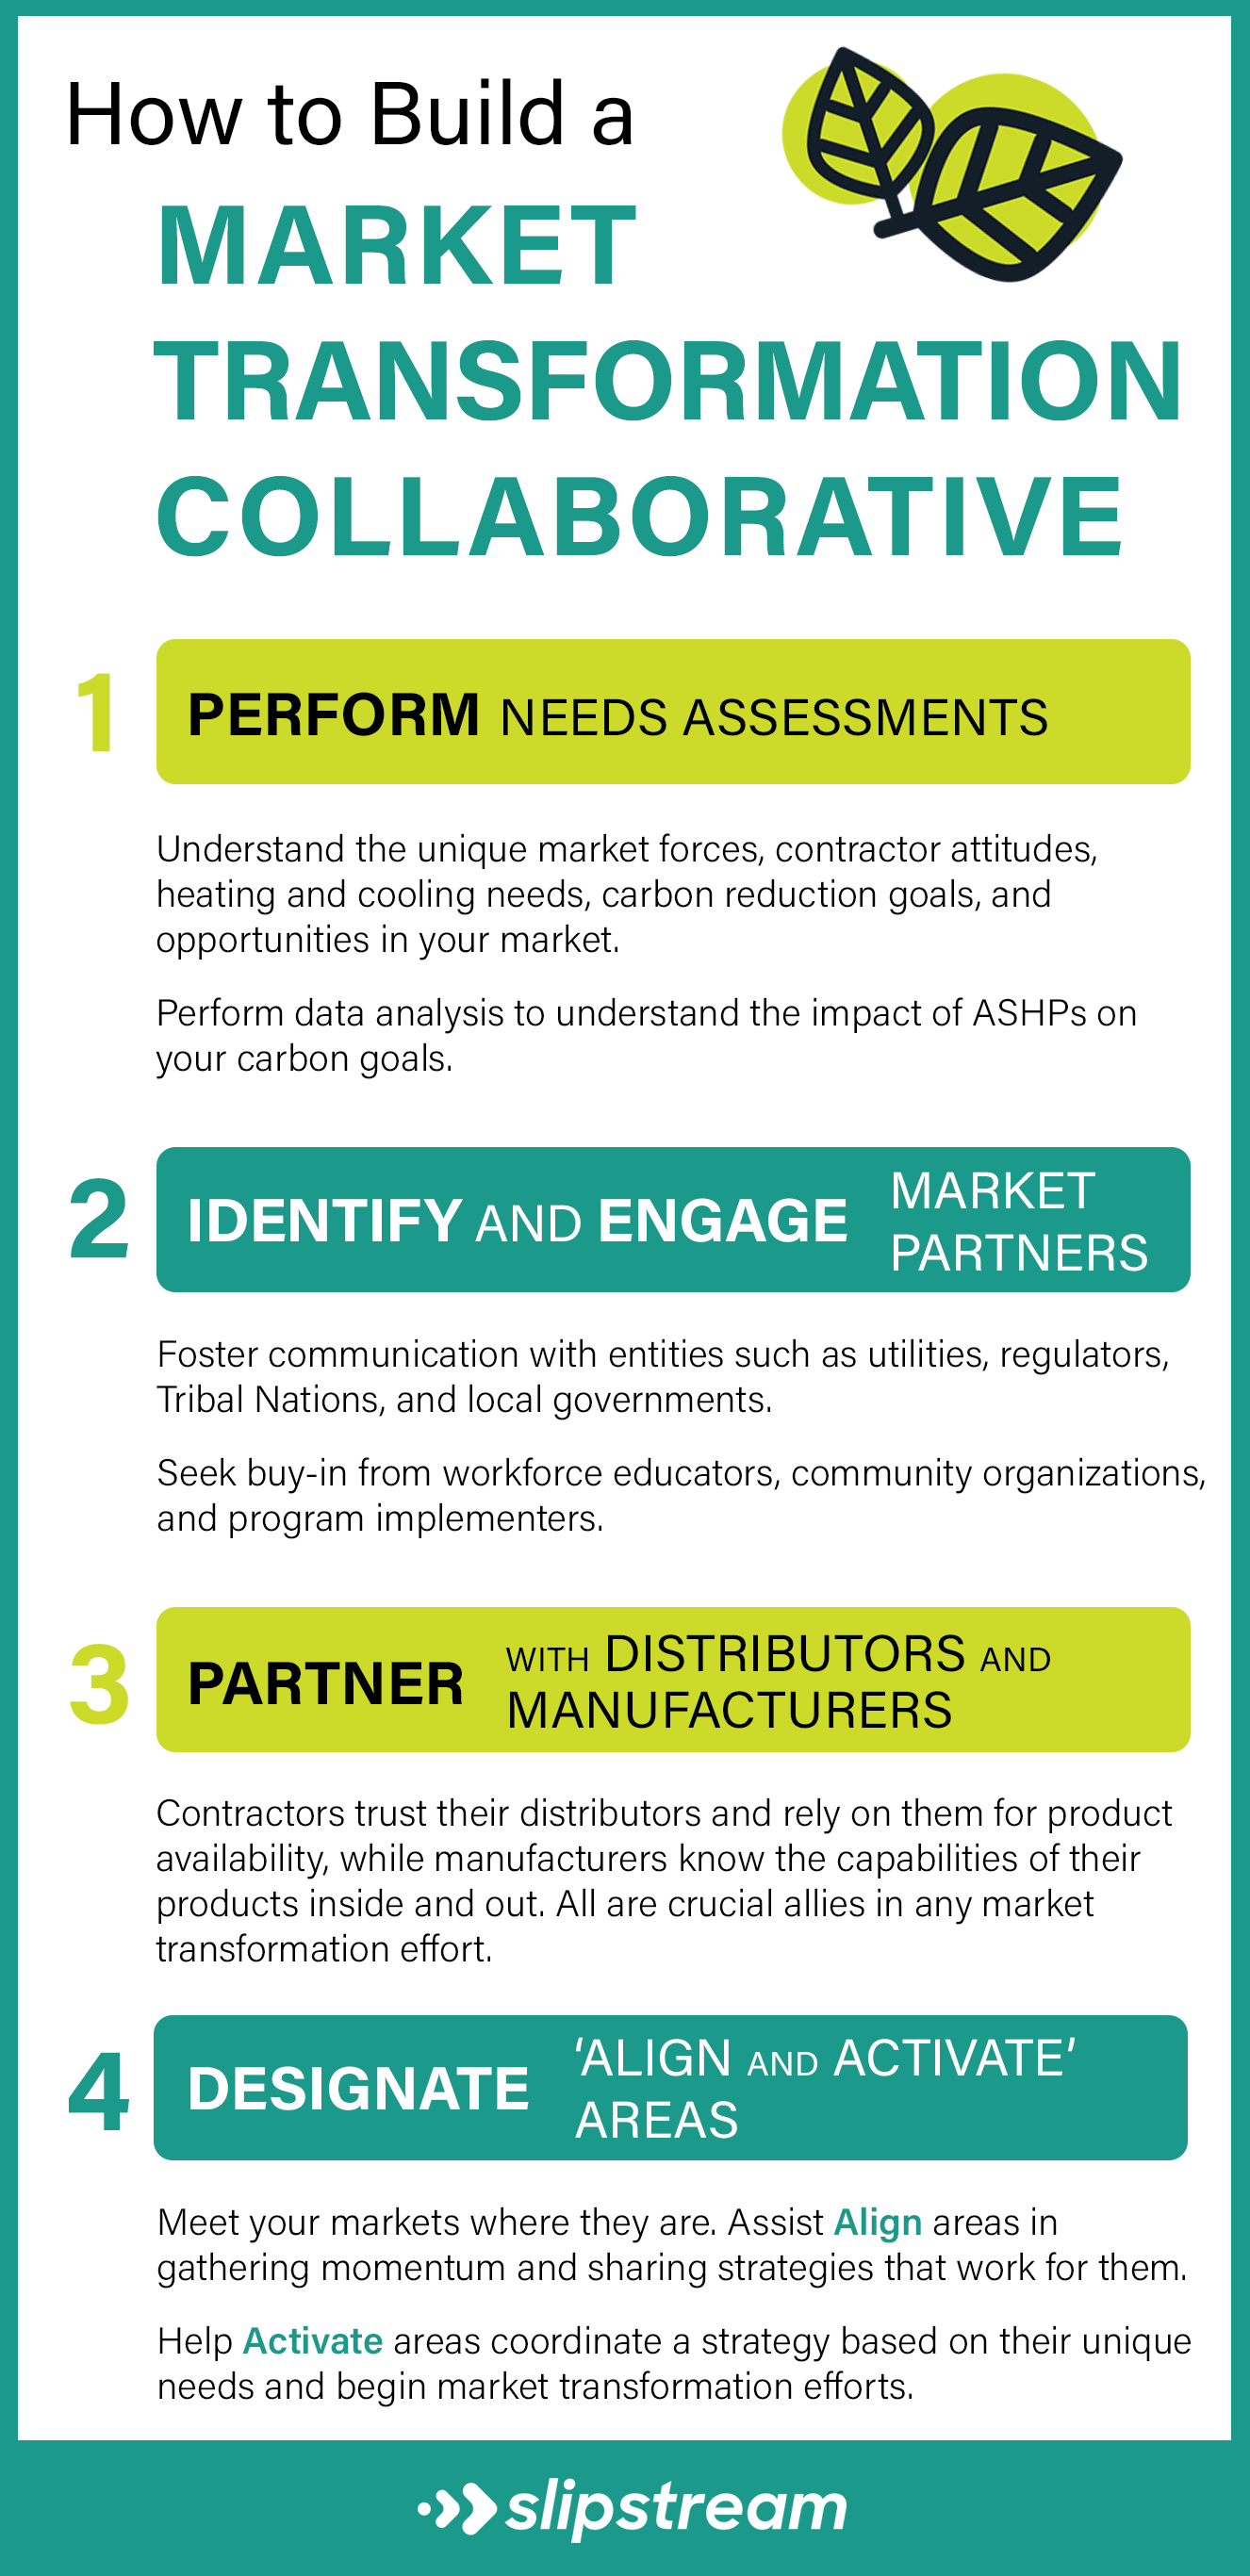 Infographic going over the necessary steps to build a Market Transformation Collaborative.